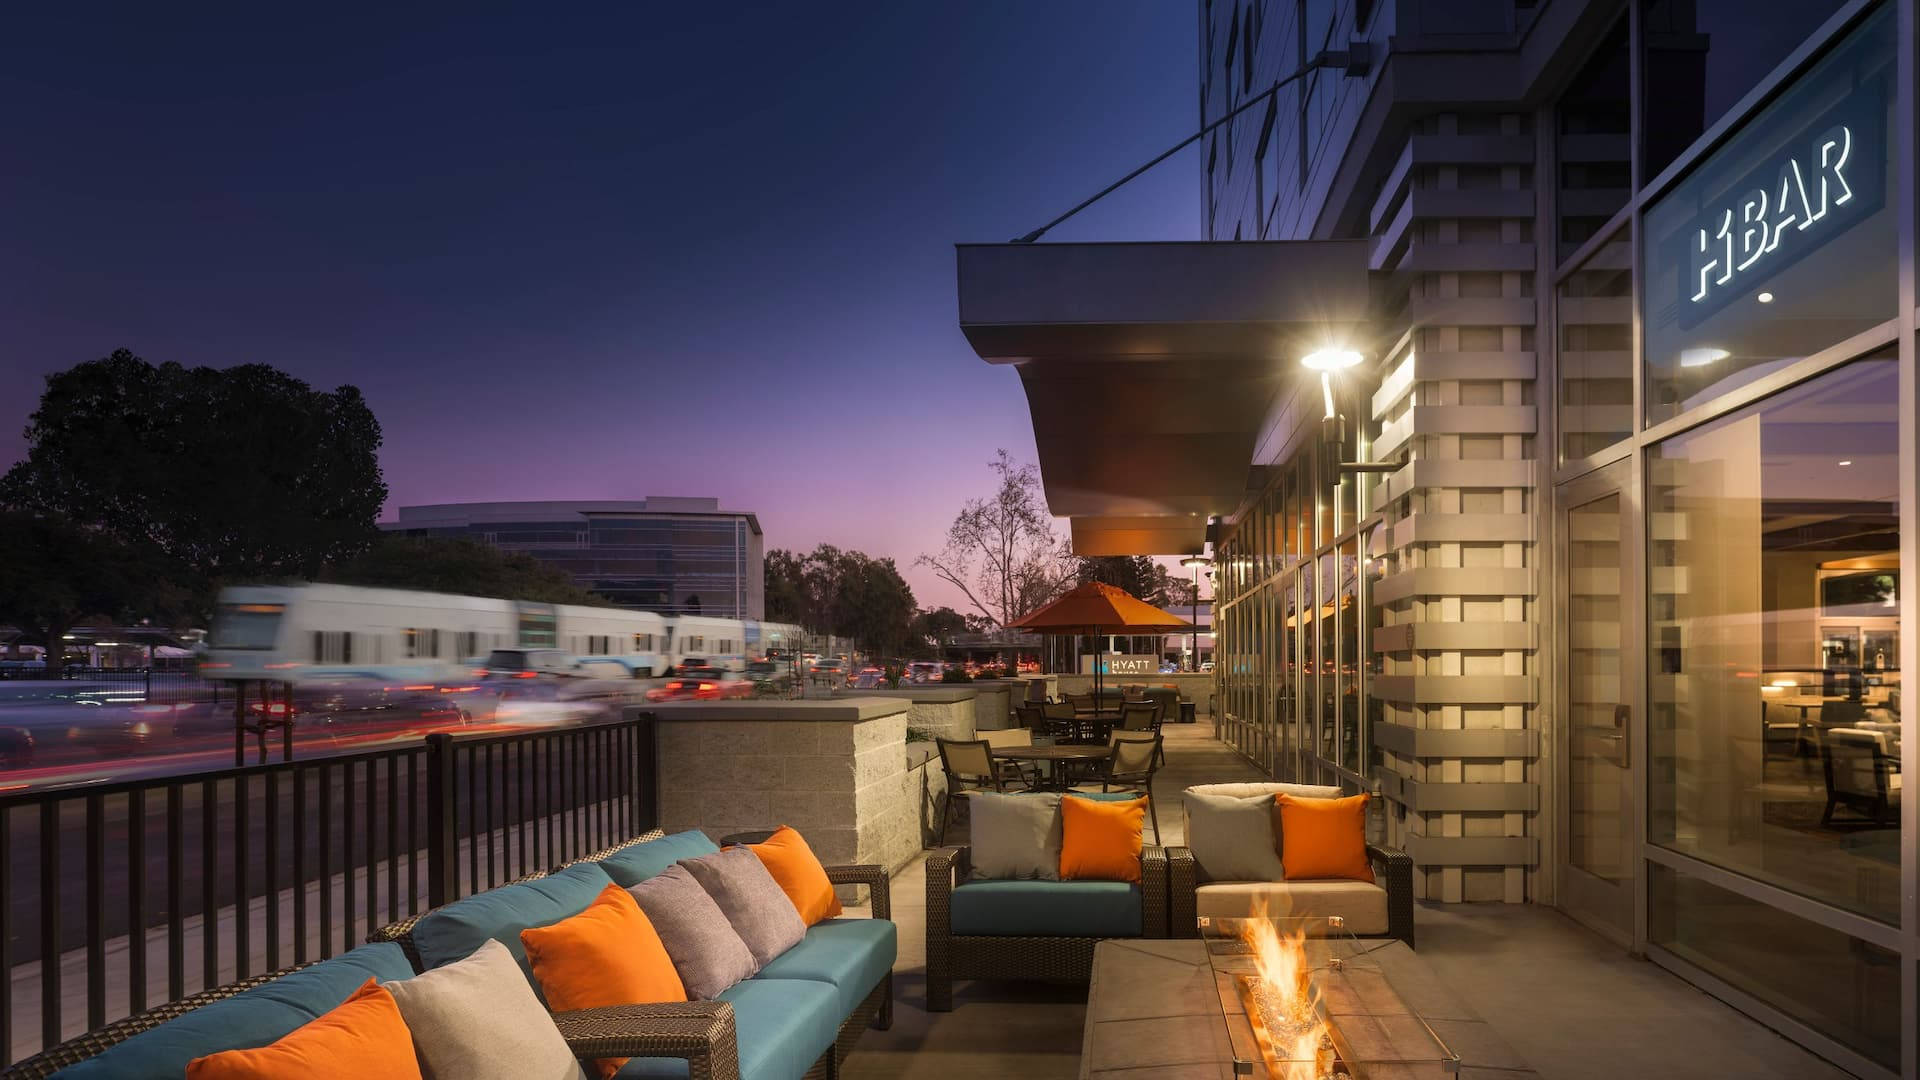 a patio with couches and fire pit at dusk Wallpaper